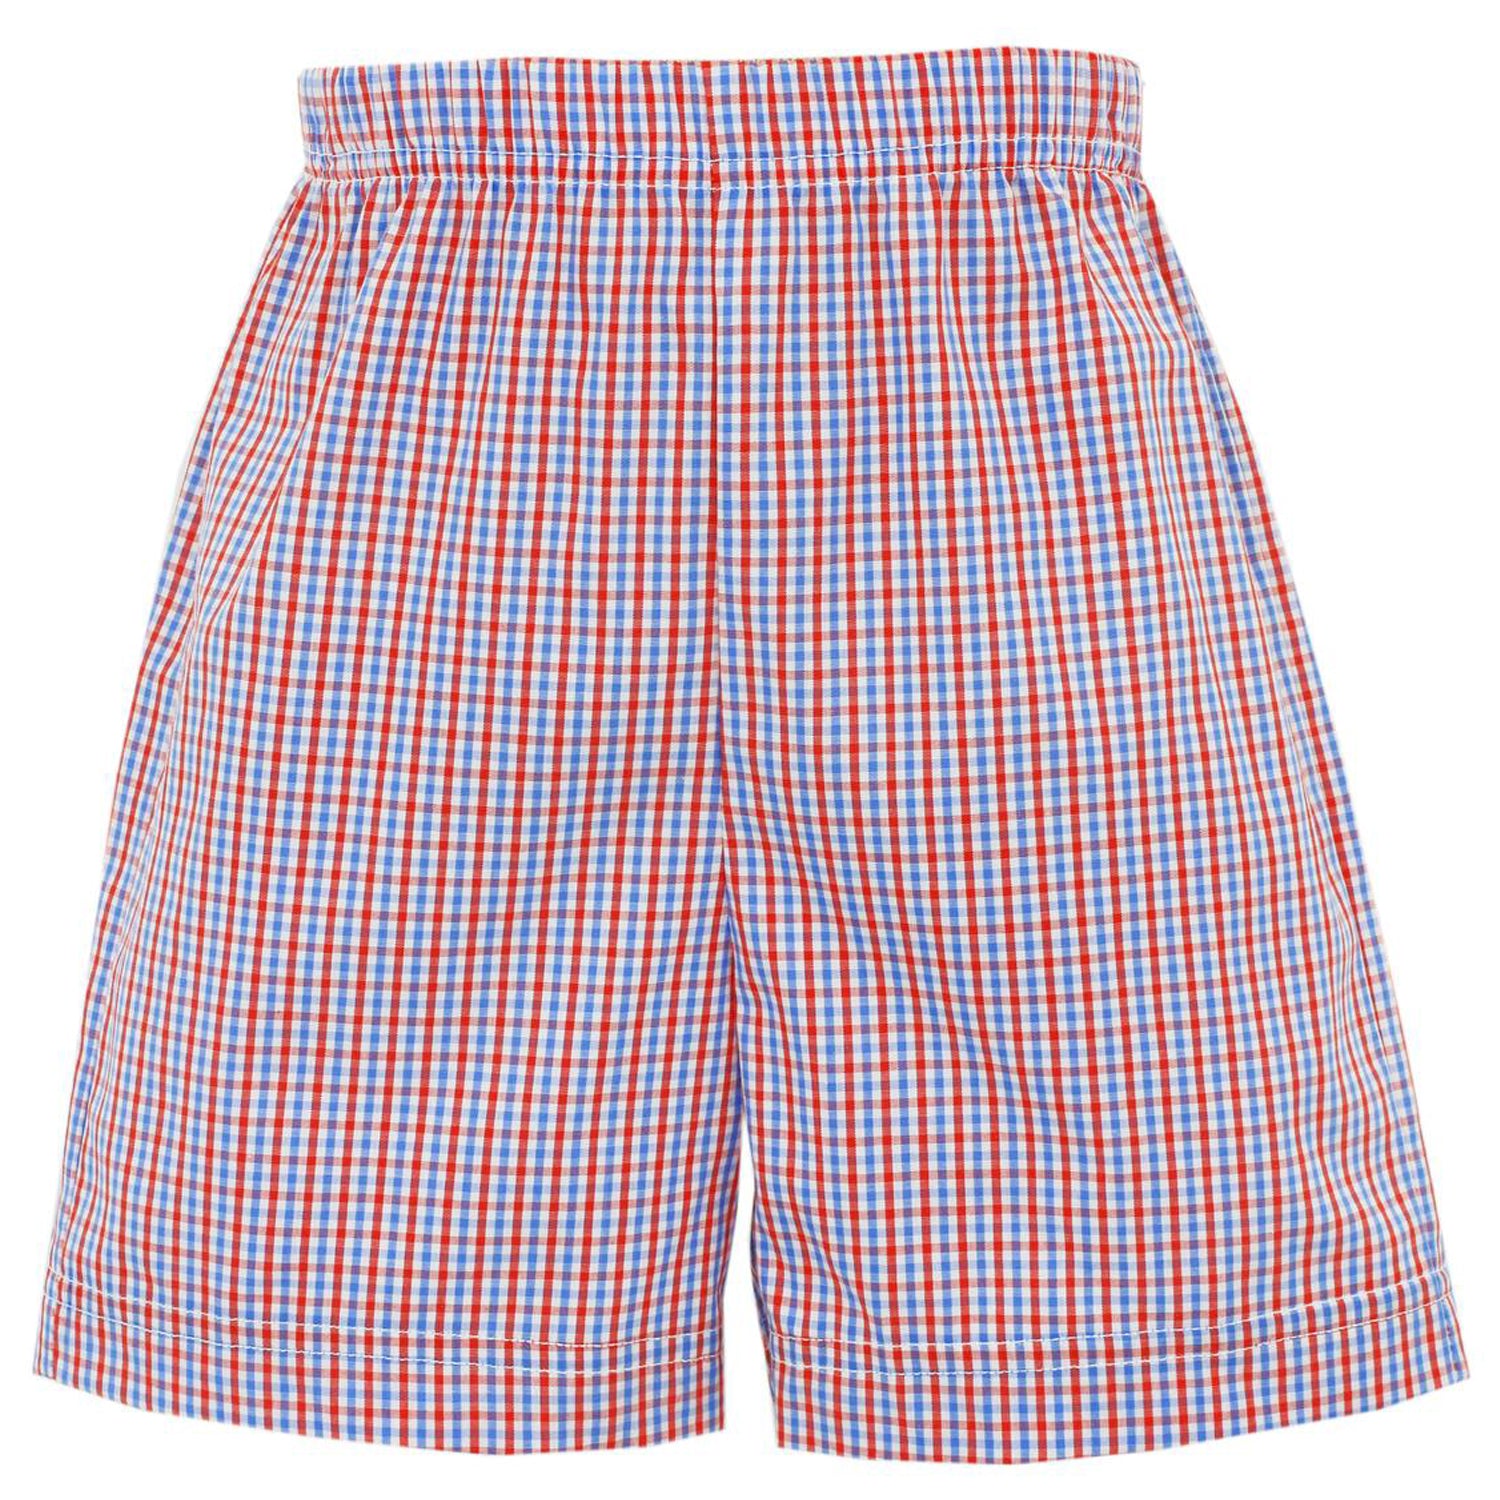 Red and Blue Gingham Boy's Shorts